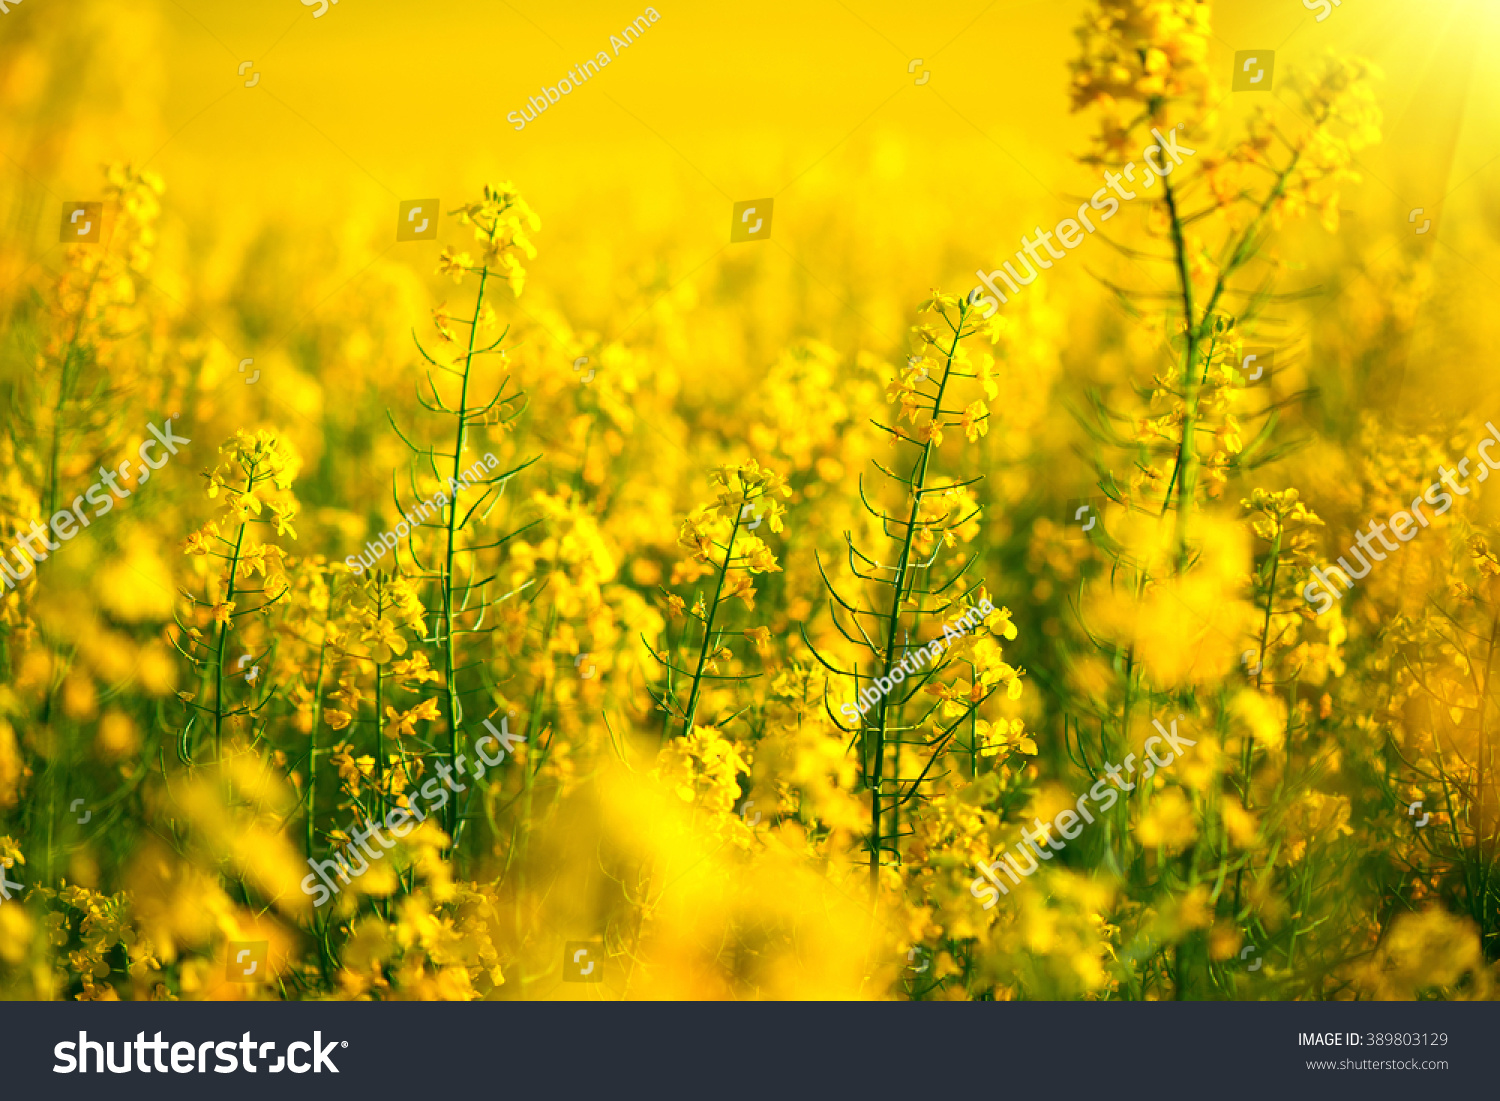 Rapeseed field, Blooming canola flowers close up. Rape on the field in summer. Bright Yellow rapeseed oil. Flowering rapeseed #389803129